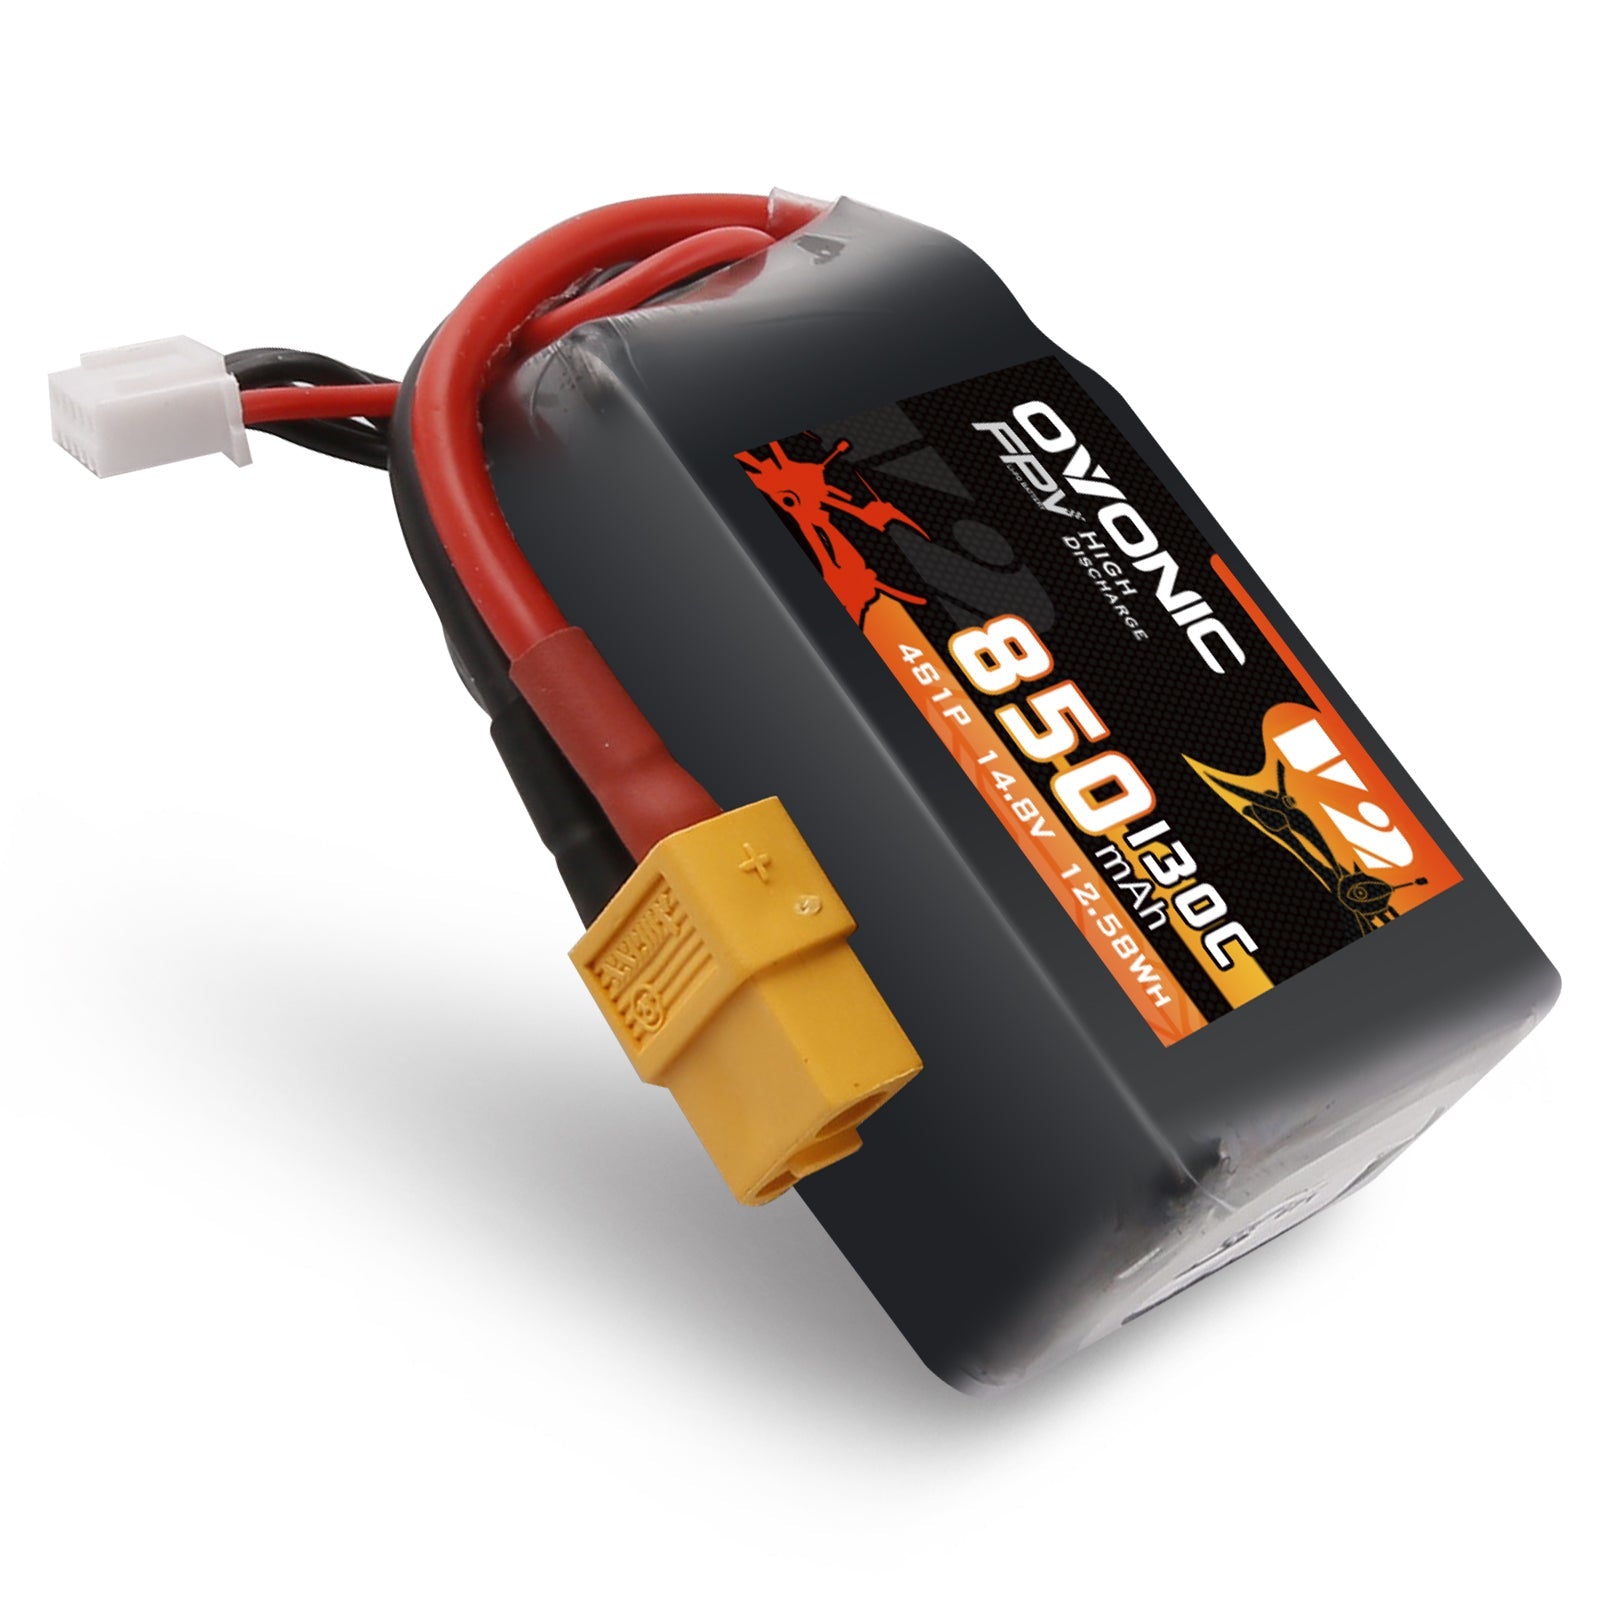 4x Ovonic 130C 4S 850mah Lipo Battery 14.8V Pack with XT60 Plug for rc